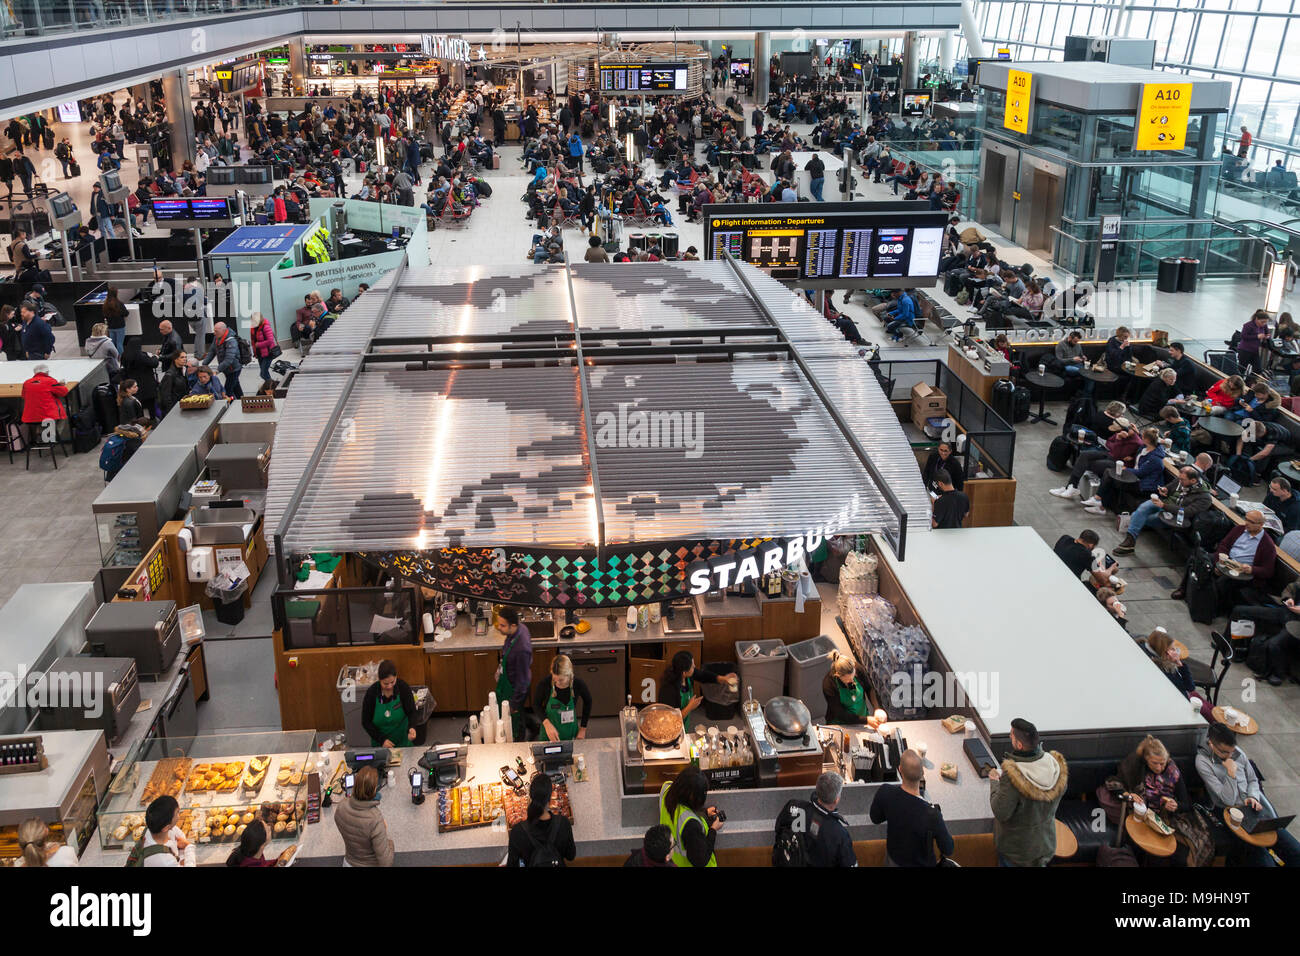 Heathrow Airport Terminal Five Departures Lounge and concourse. Large world map on roof of Starbucks outlet. Busy with passengers on a day of many fli Stock Photo